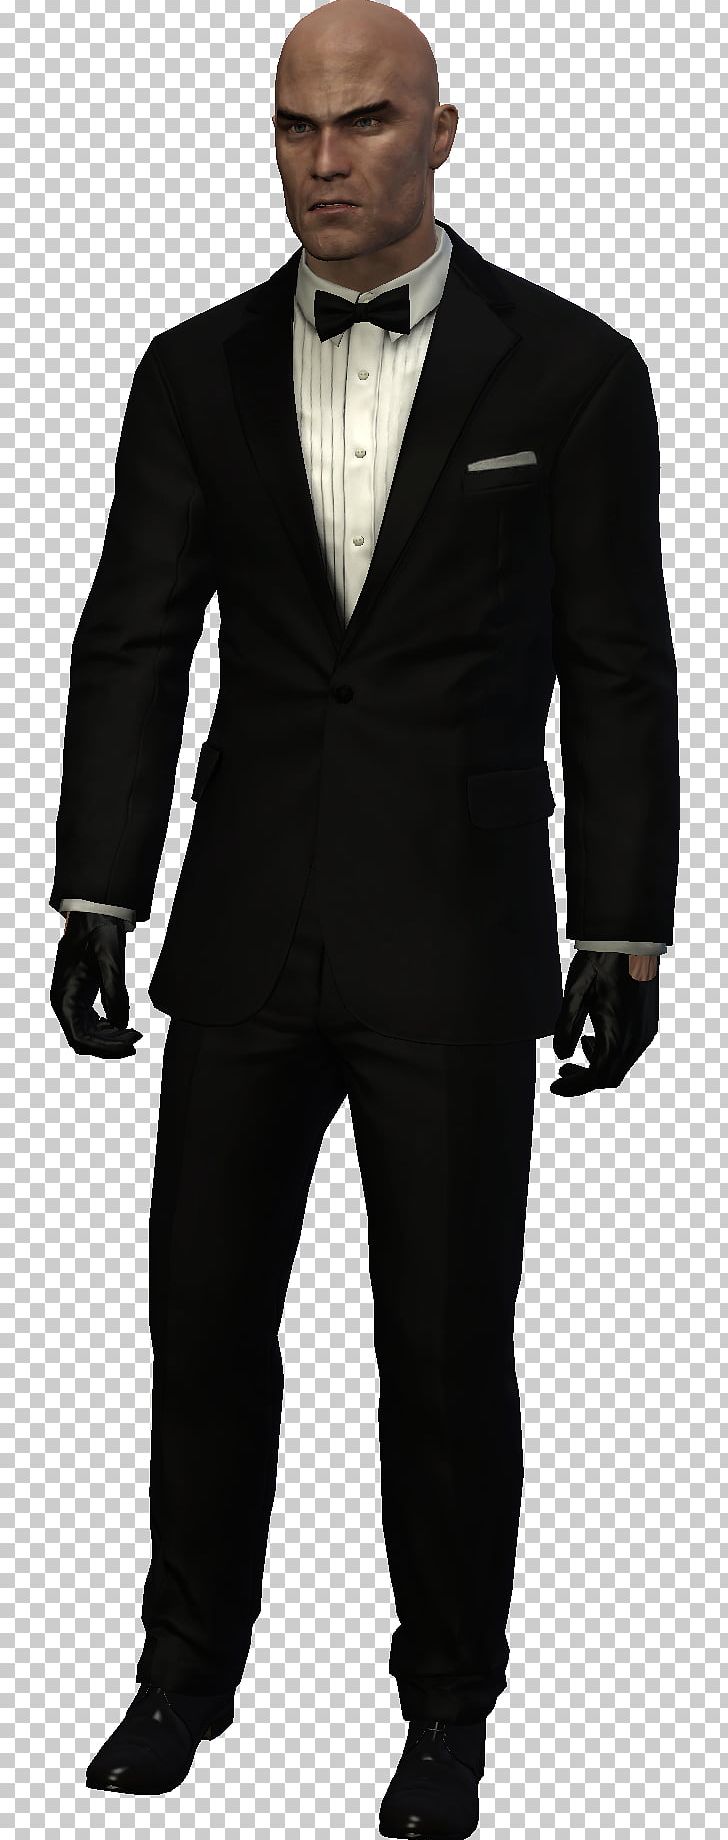 Hitman: Absolution Hitman: Agent 47 High Roller PNG, Clipart, Agent 47, Businessperson, Costume, Disguise, Formal Wear Free PNG Download